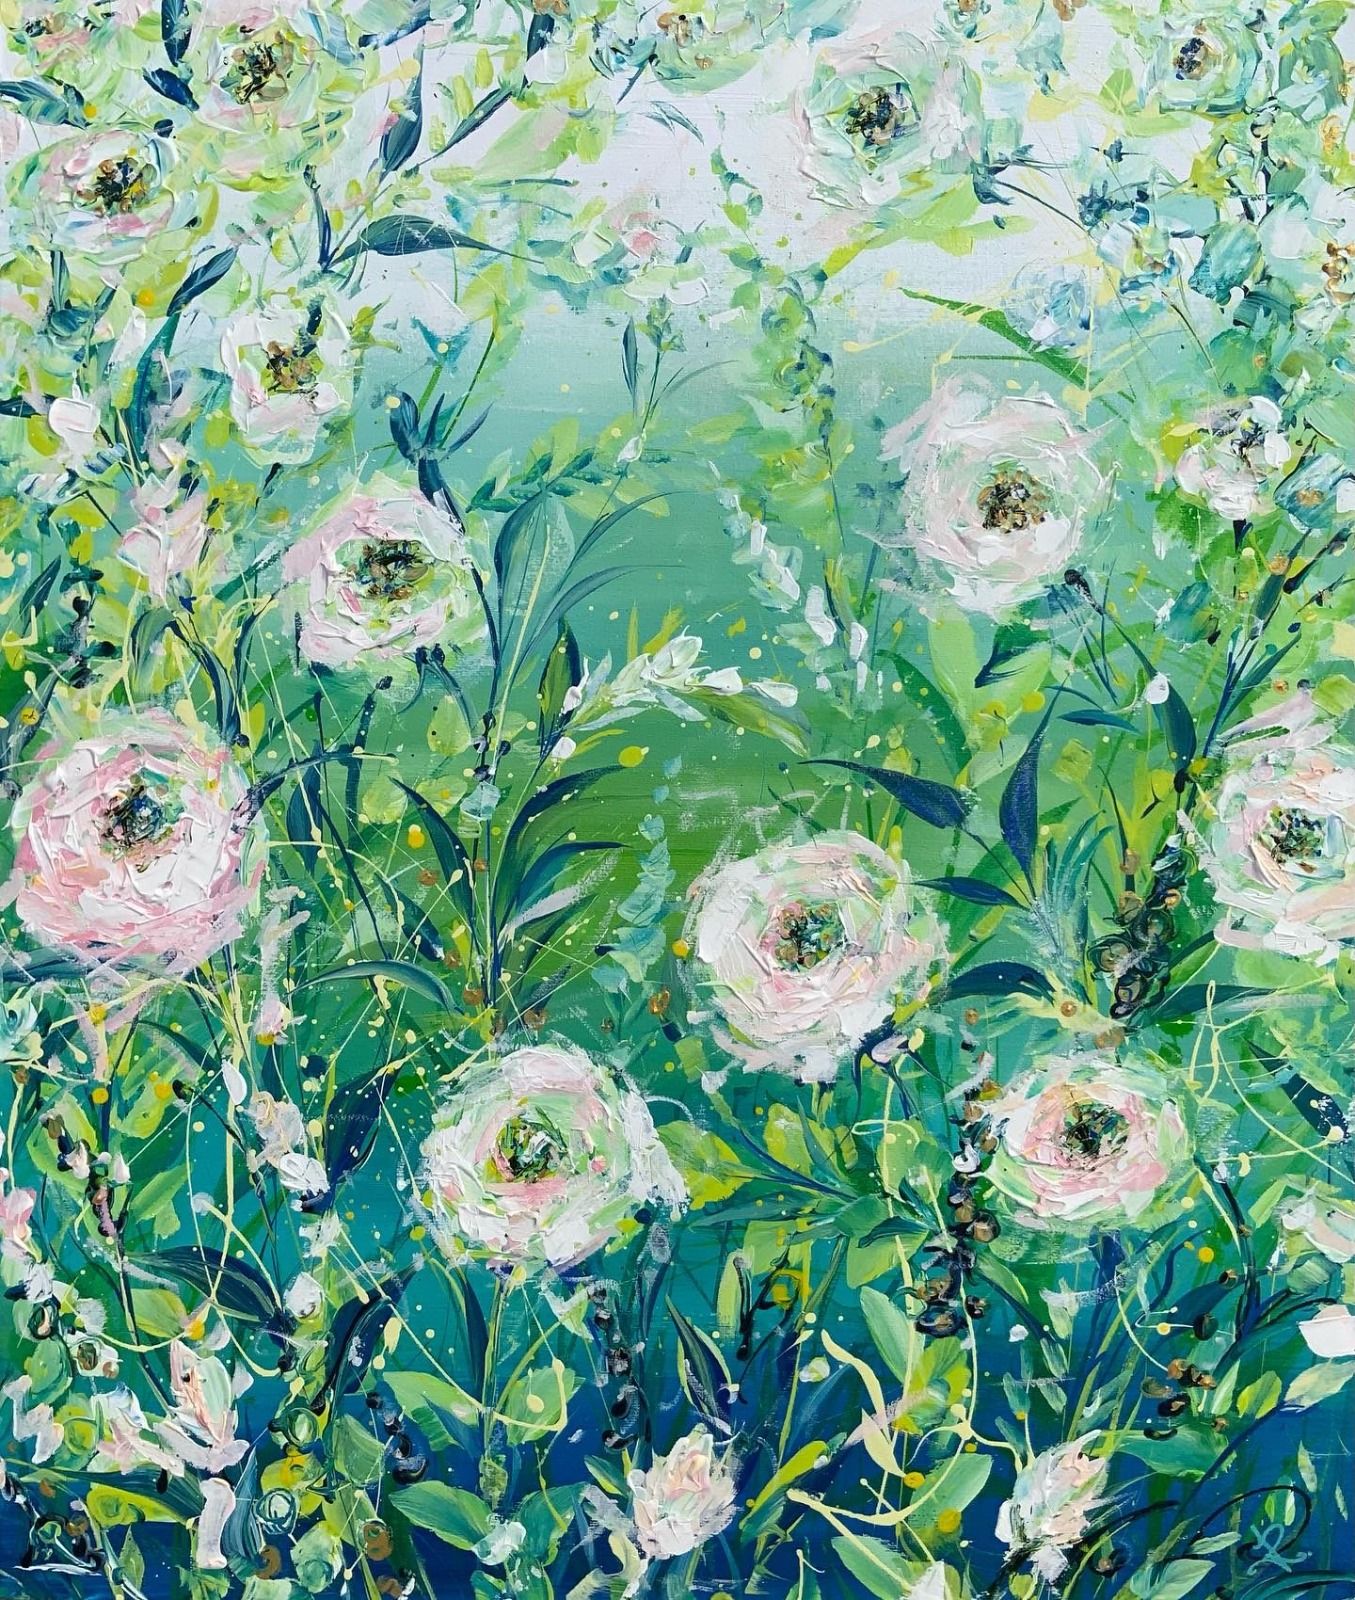 Wild Wild Roses by Jan Rogers